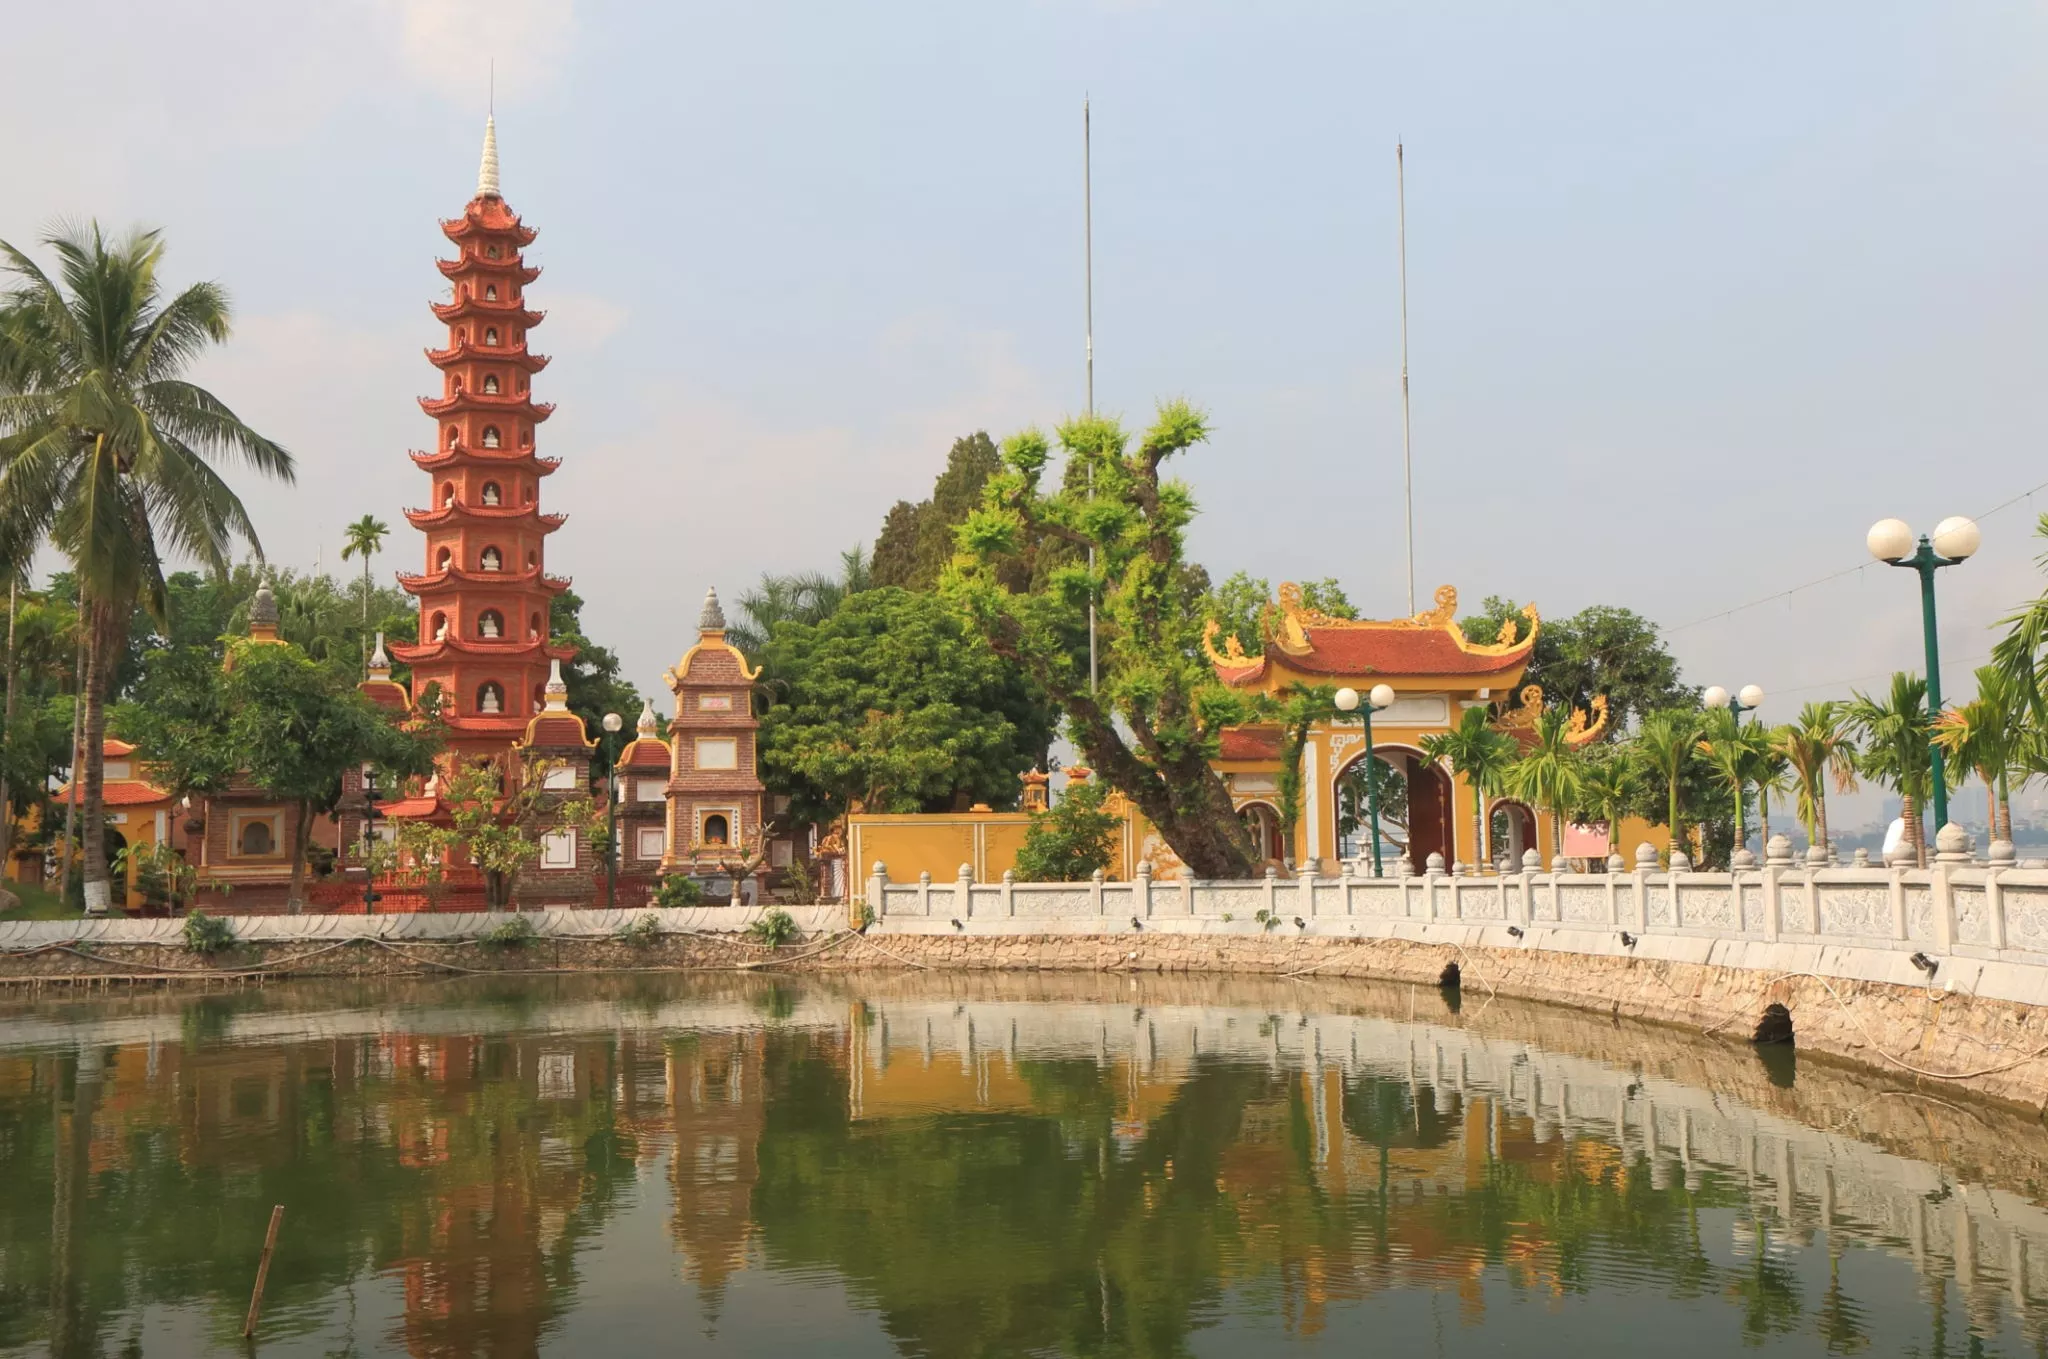 Changquoc Pagoda in Vietnam, East Asia | Architecture - Rated 3.7